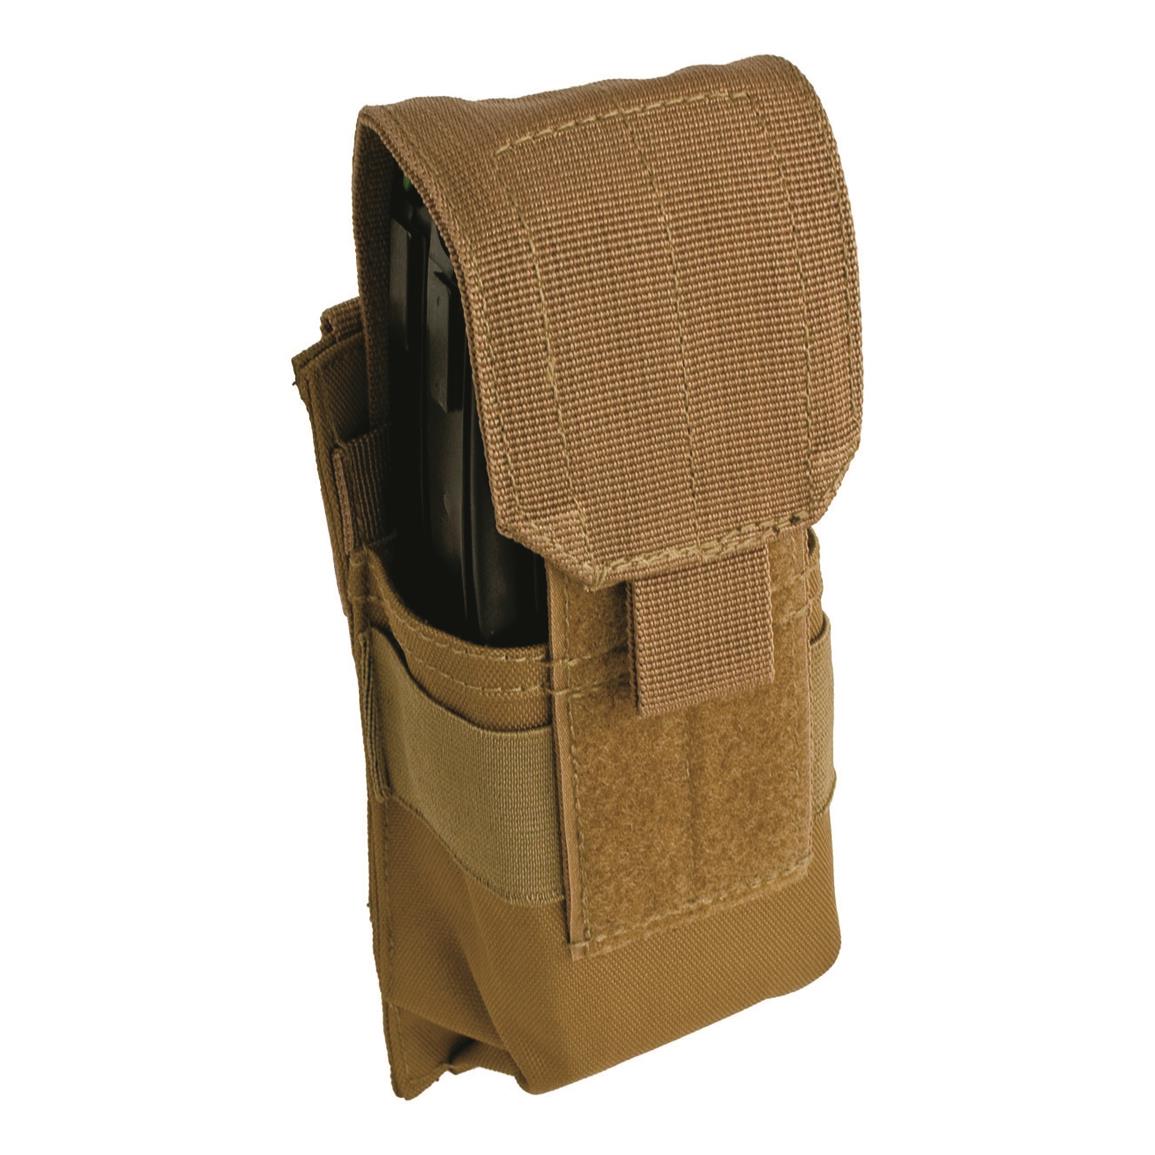 Red Rock Outdoor Gear MOLLE Single Rifle Mag Pouches, 4 pack, Coyote